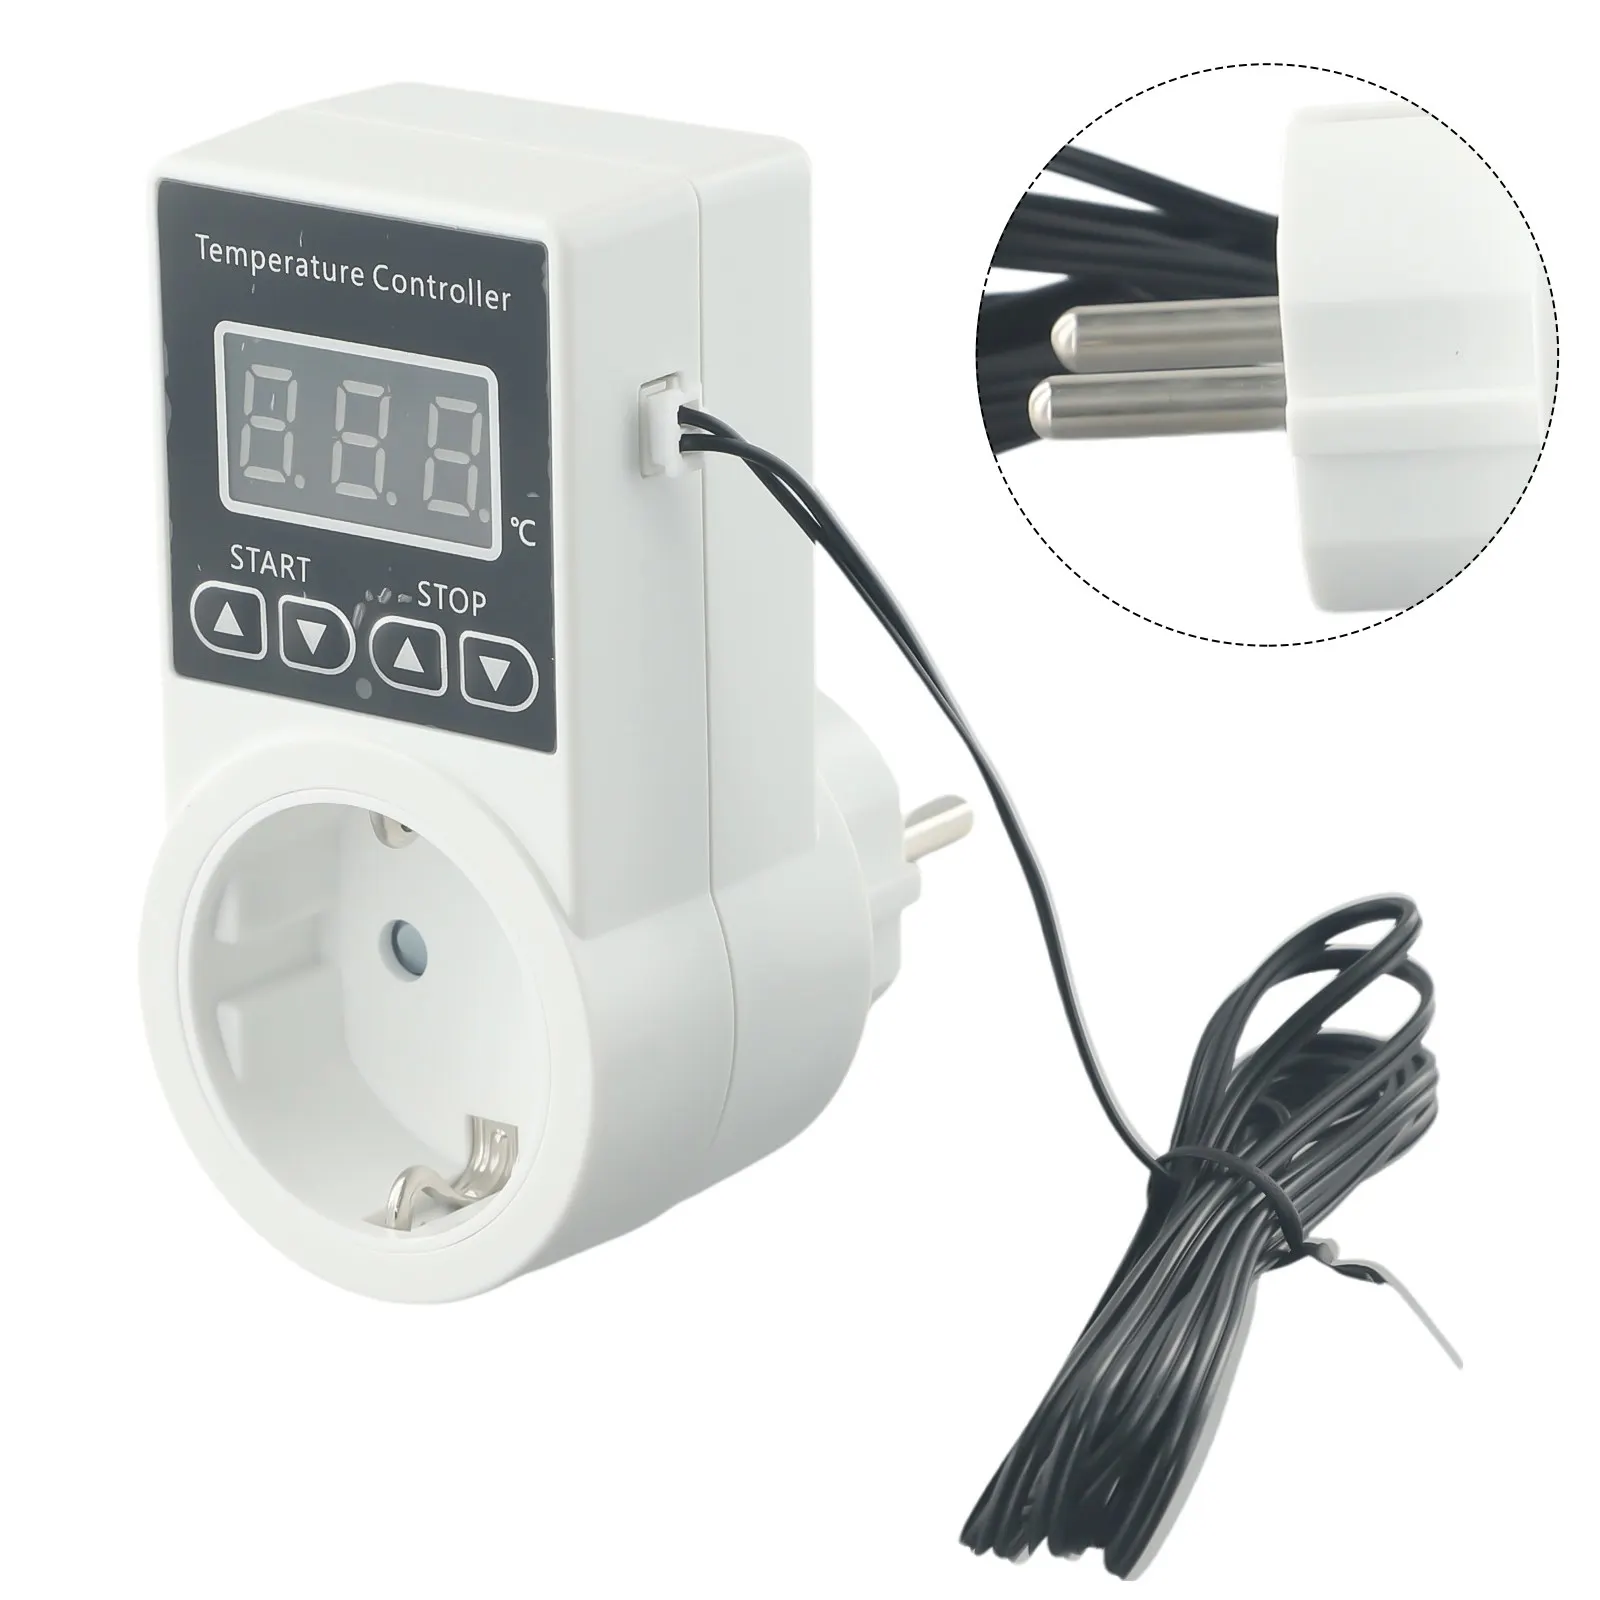 Temperature Switch Thermostat Sockets Digital EU Plug 100-240V AC For Greenhouse Heating LCD Display Temperature Controller